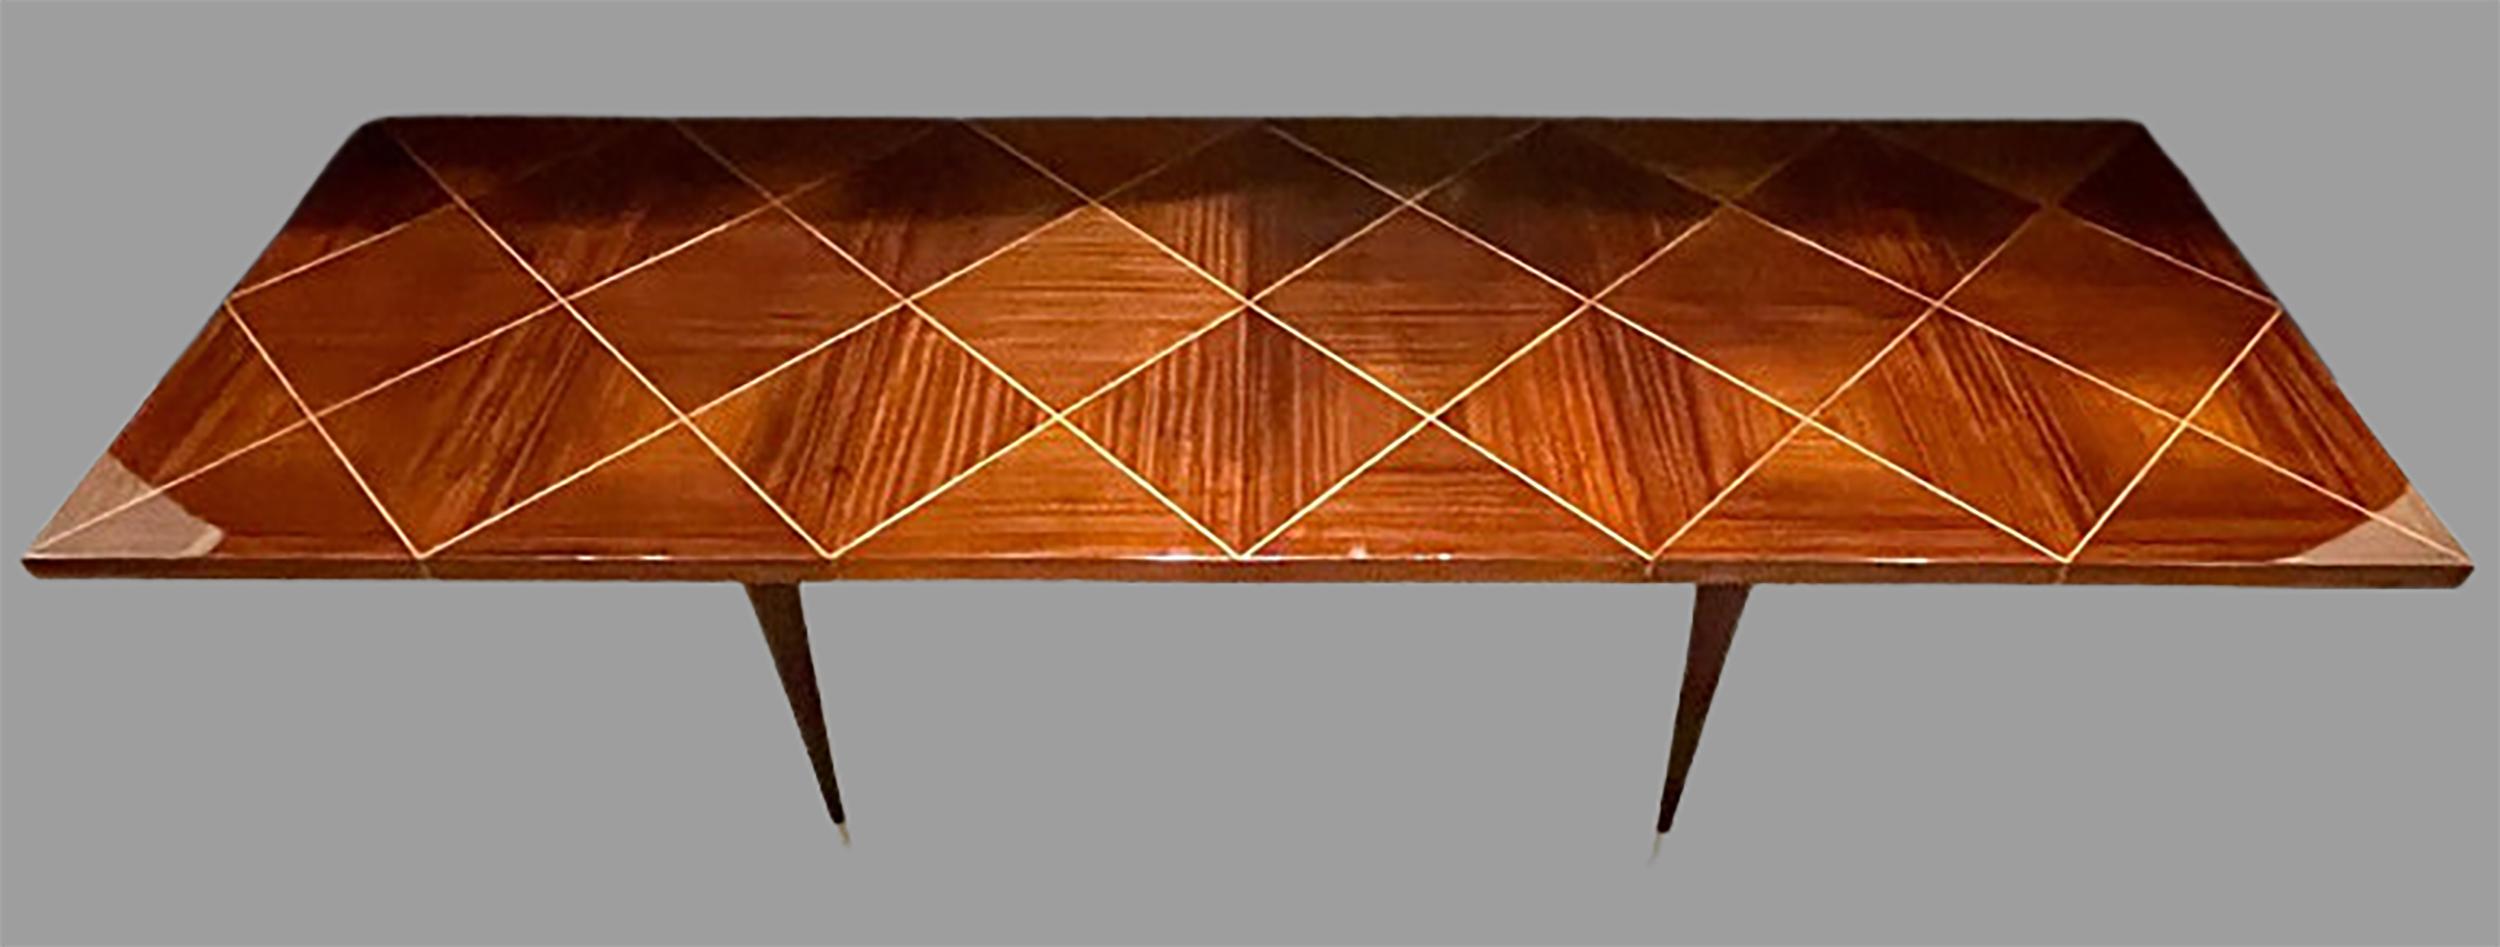 A Tommi Parzinger Originals Dining Table Fully Refinished with Two Leaves that measure 17.25 inches each. The sleek tapering reeded legs supporting a think sturdy table top of mahogany design with line inlays. The top finely done over to a mirror